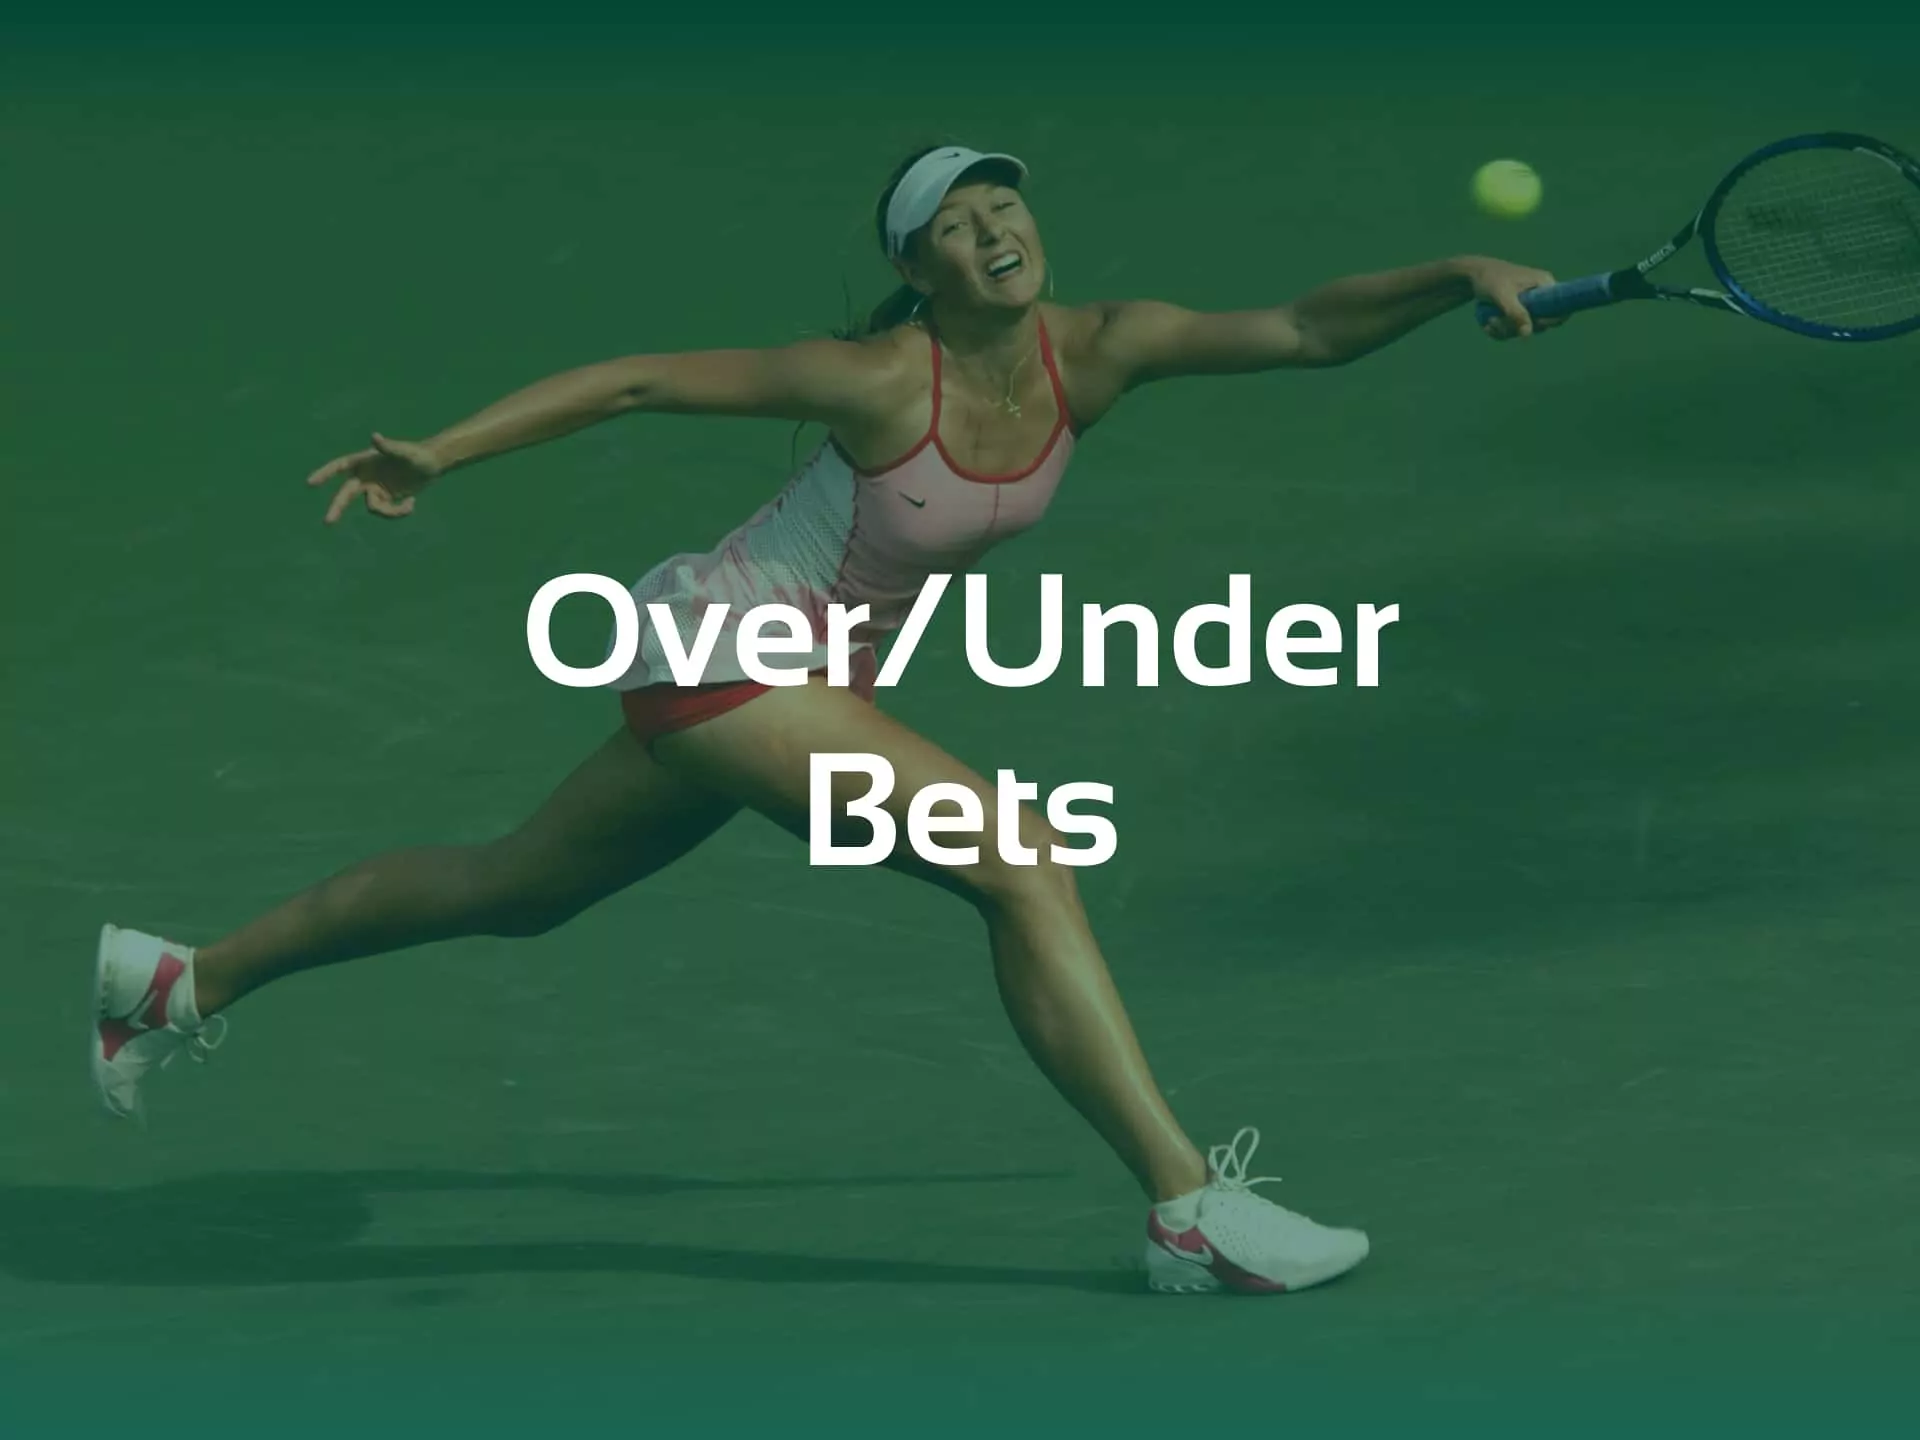 Over - Under Bets on tennis betting sites.